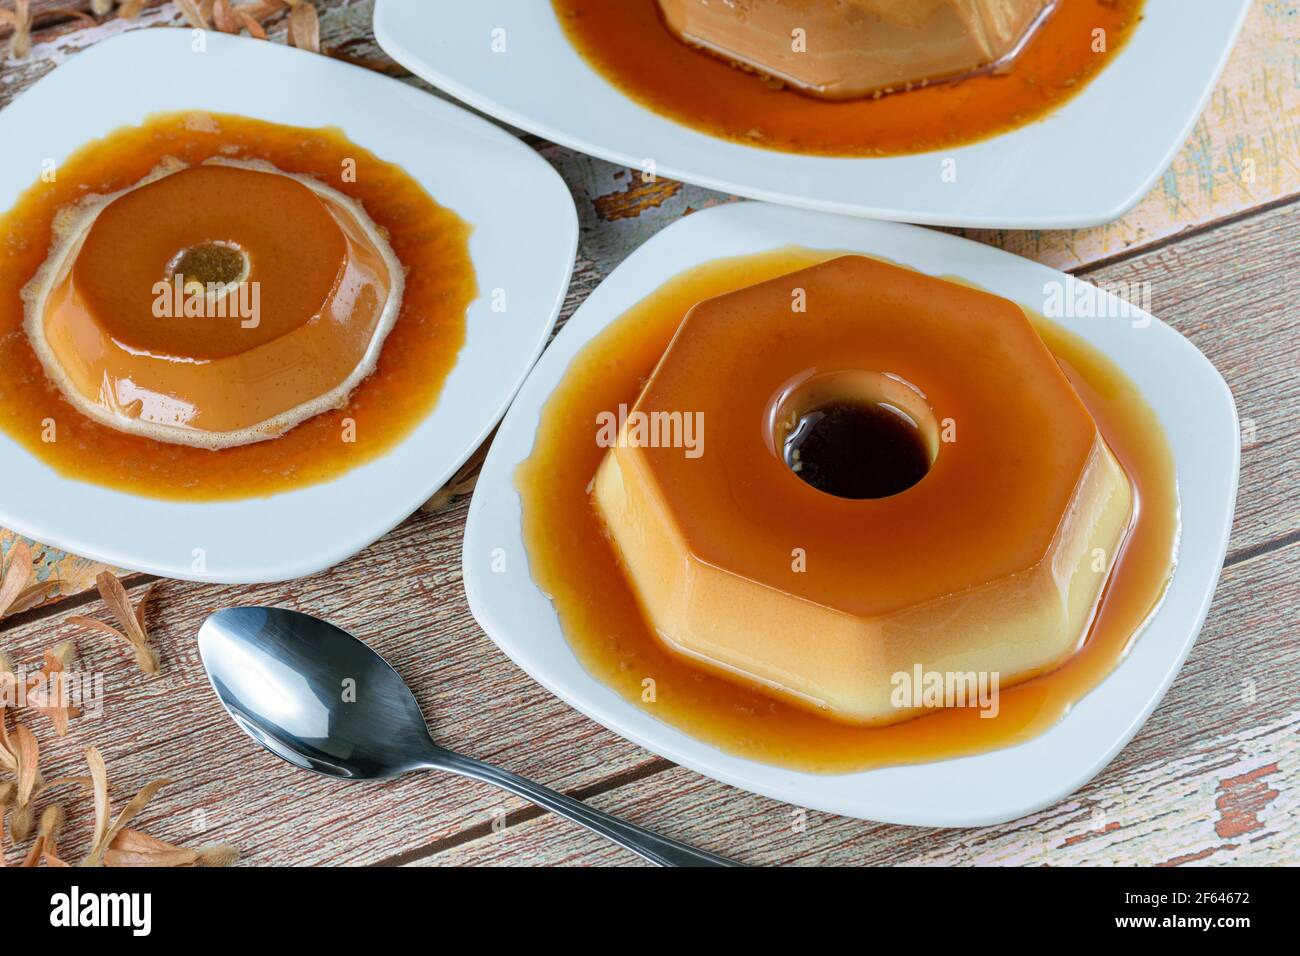 Condensed milk pudding with caramel syrup, surrounded by other puddings, spoon and flying seeds (Triplaris amaricana). Traditional Brazilian sweet. Stock Photo